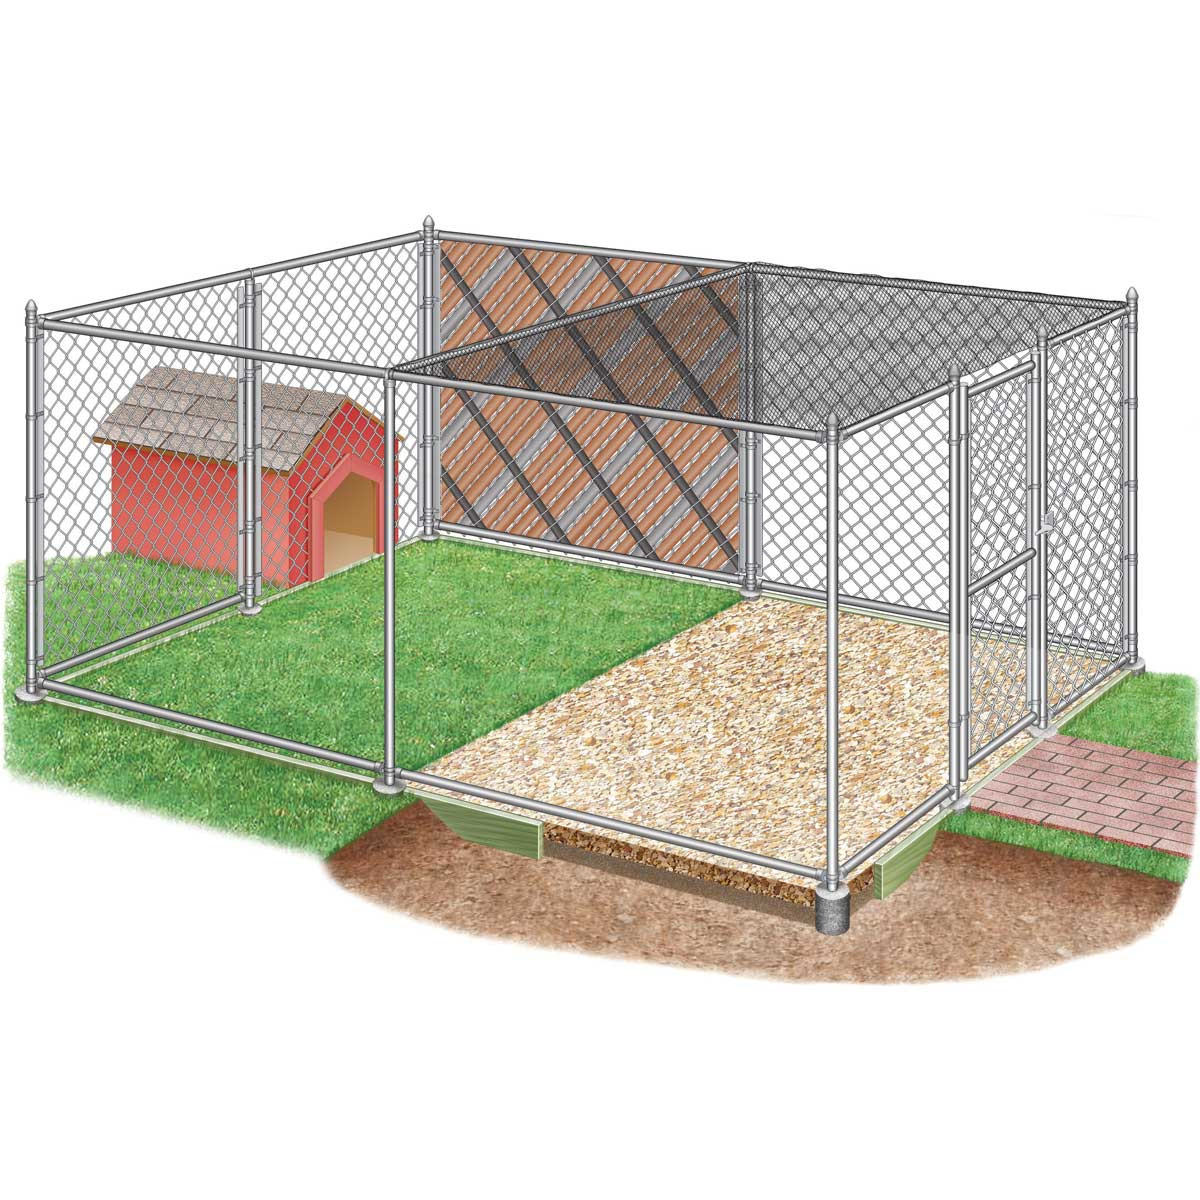 DIY Dog Kennel And Run
 How to Build Chain Link Outdoor Dog Kennels